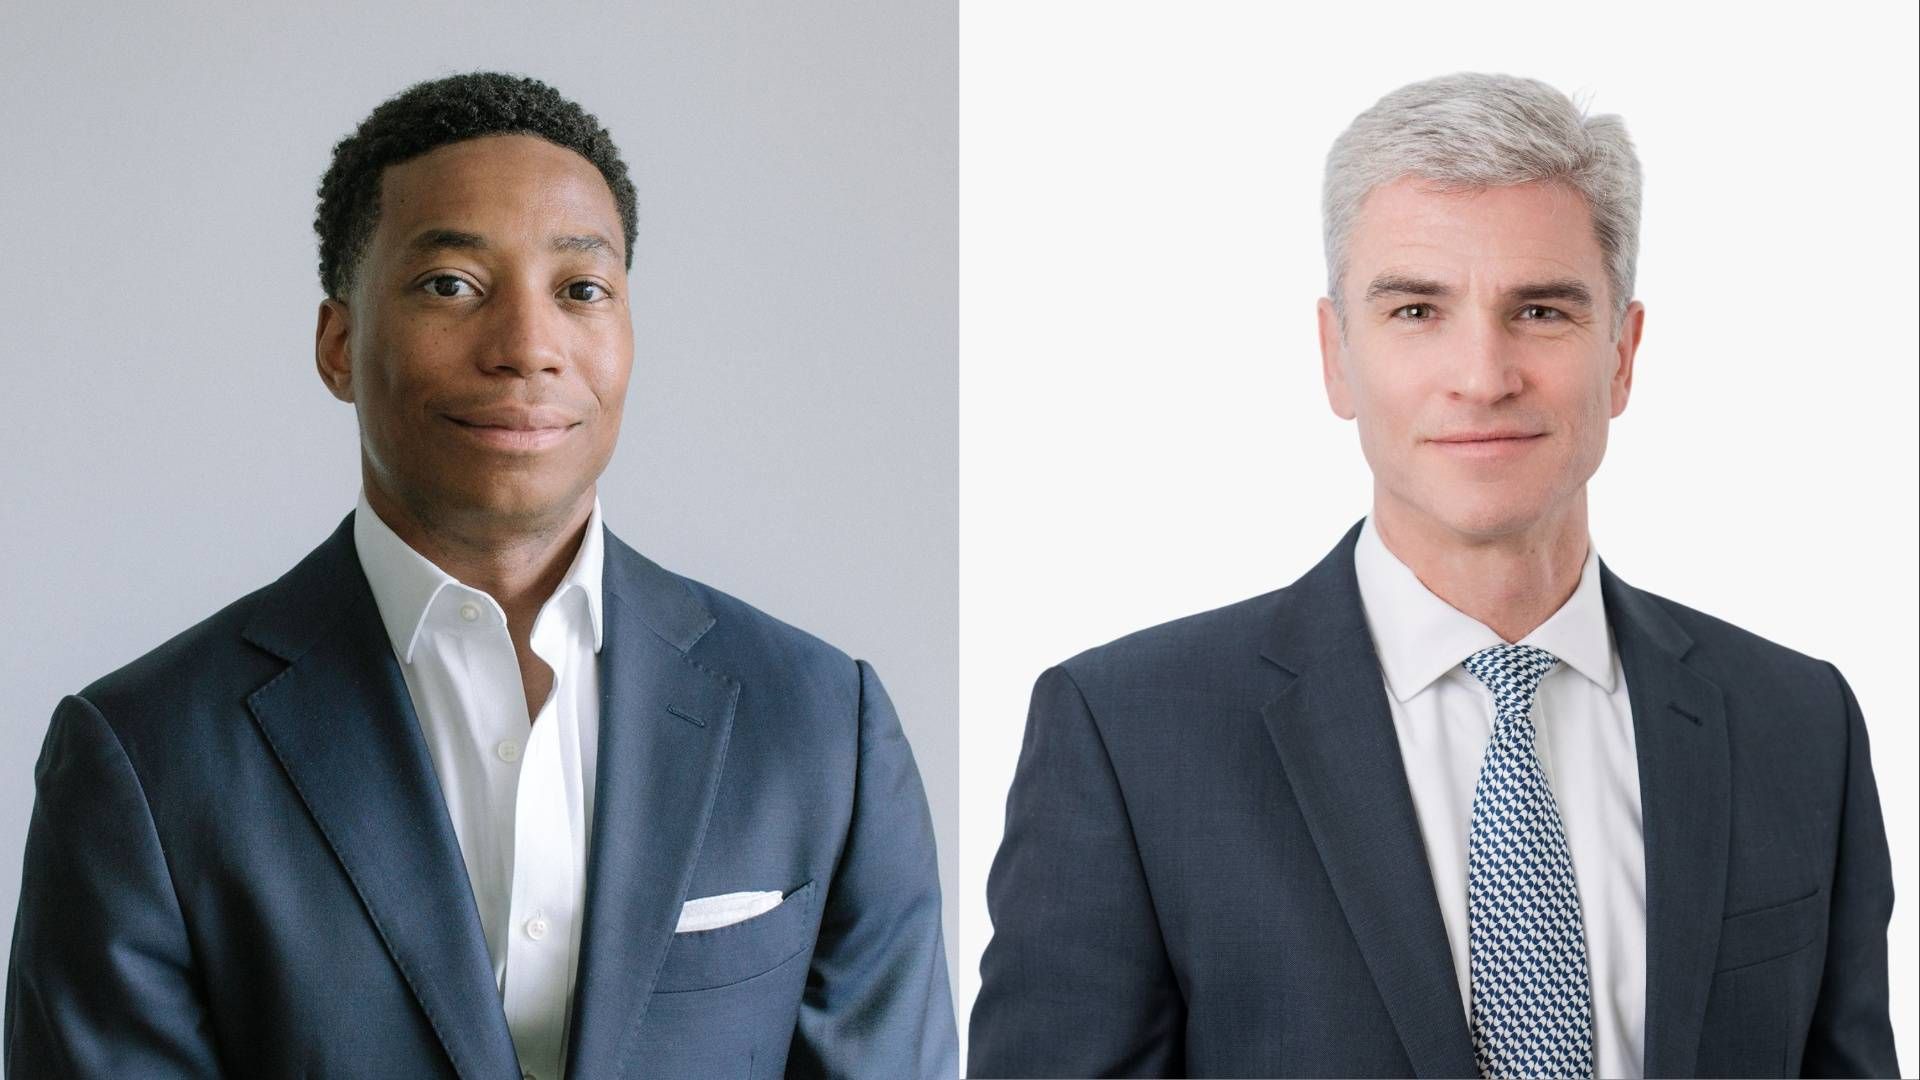 Abdallah Muhammad, who heads Tabula’s Nordic business development and client coverage, and Tabula's CEO Michael John Lytle. | Photo: PR / Tabula Investment Management